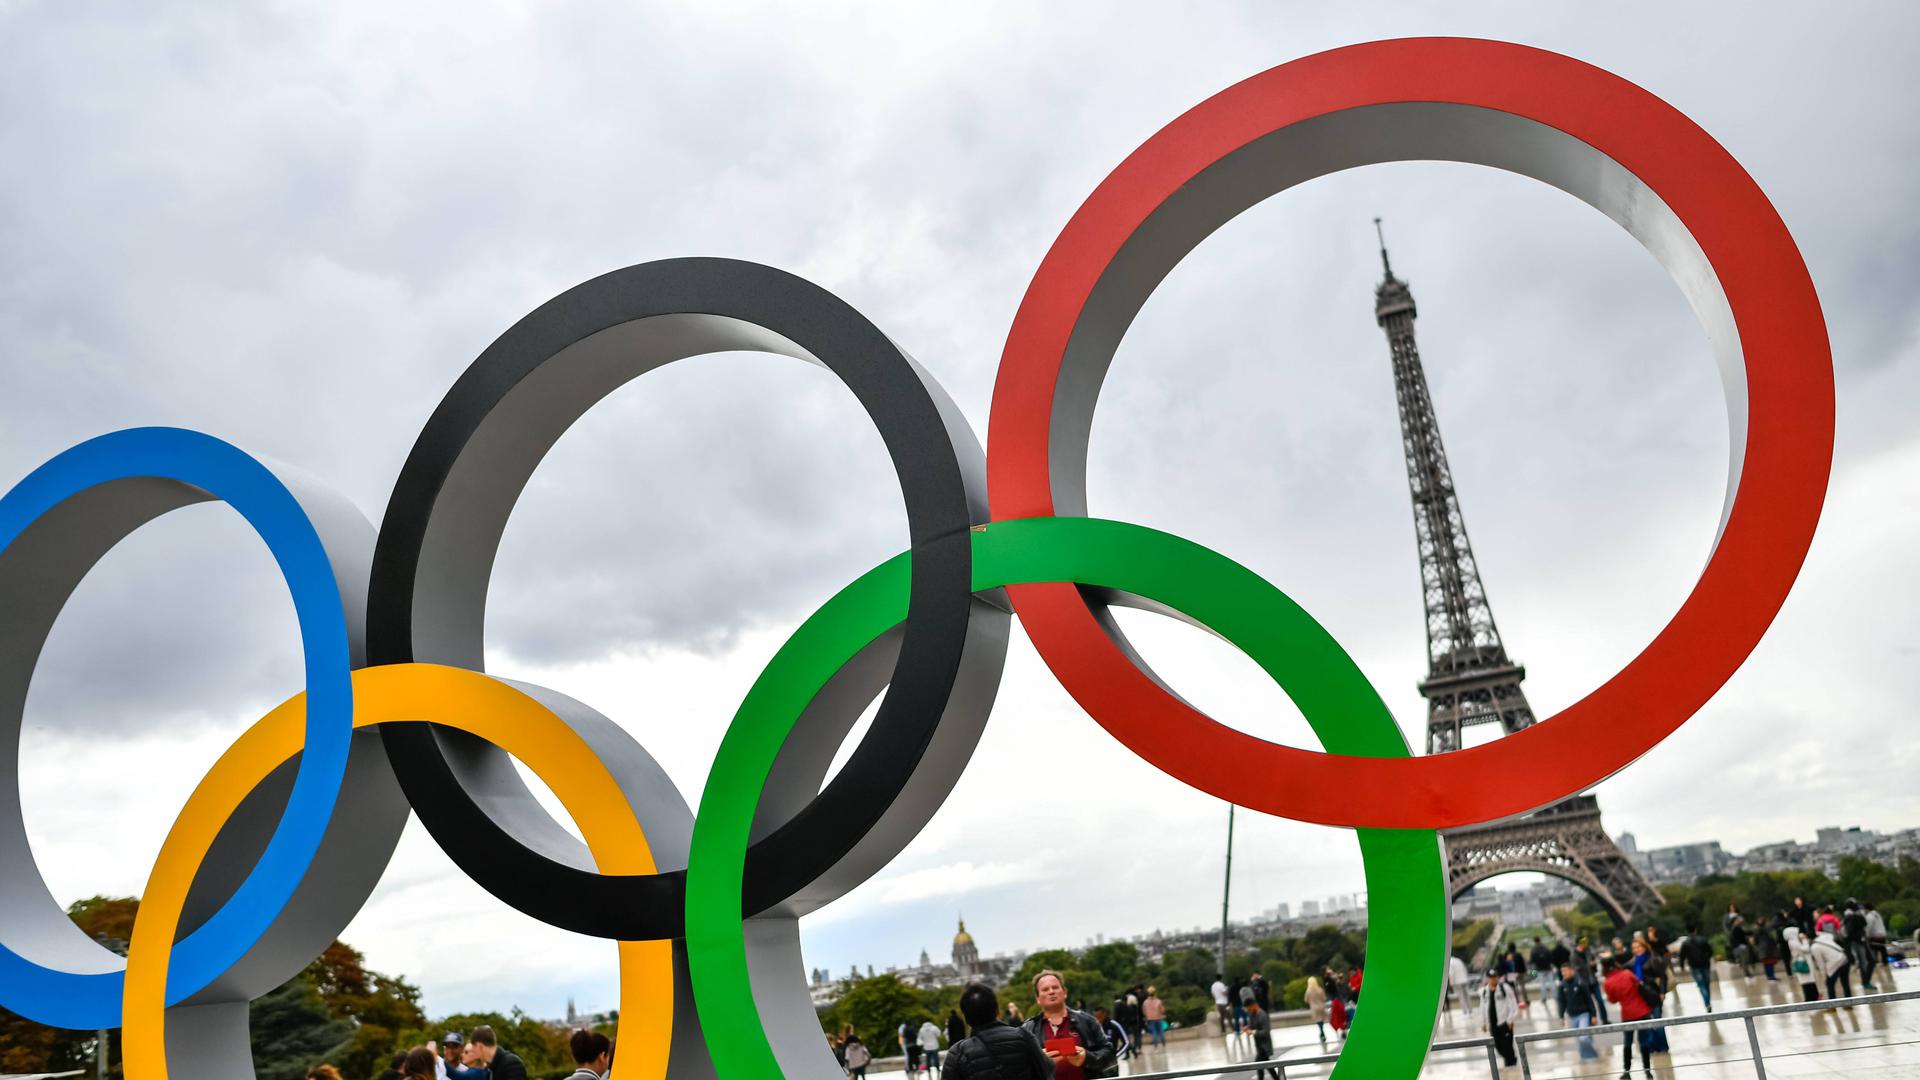 September 18, 2017 - Paris, France - After wining the 2024 olympic organisation, Paris put the Olympics Rings at the place of Honor in front of the Eiffel tower at the Trocadero s place, in Paris, France, on September 18, 2017. Olympics Rings in Paris PUBLICATIONxINxGERxSUIxAUTxONLY - ZUMAn230 20170918_zaa_n230_595 Copyright: xJulienxMattiax  